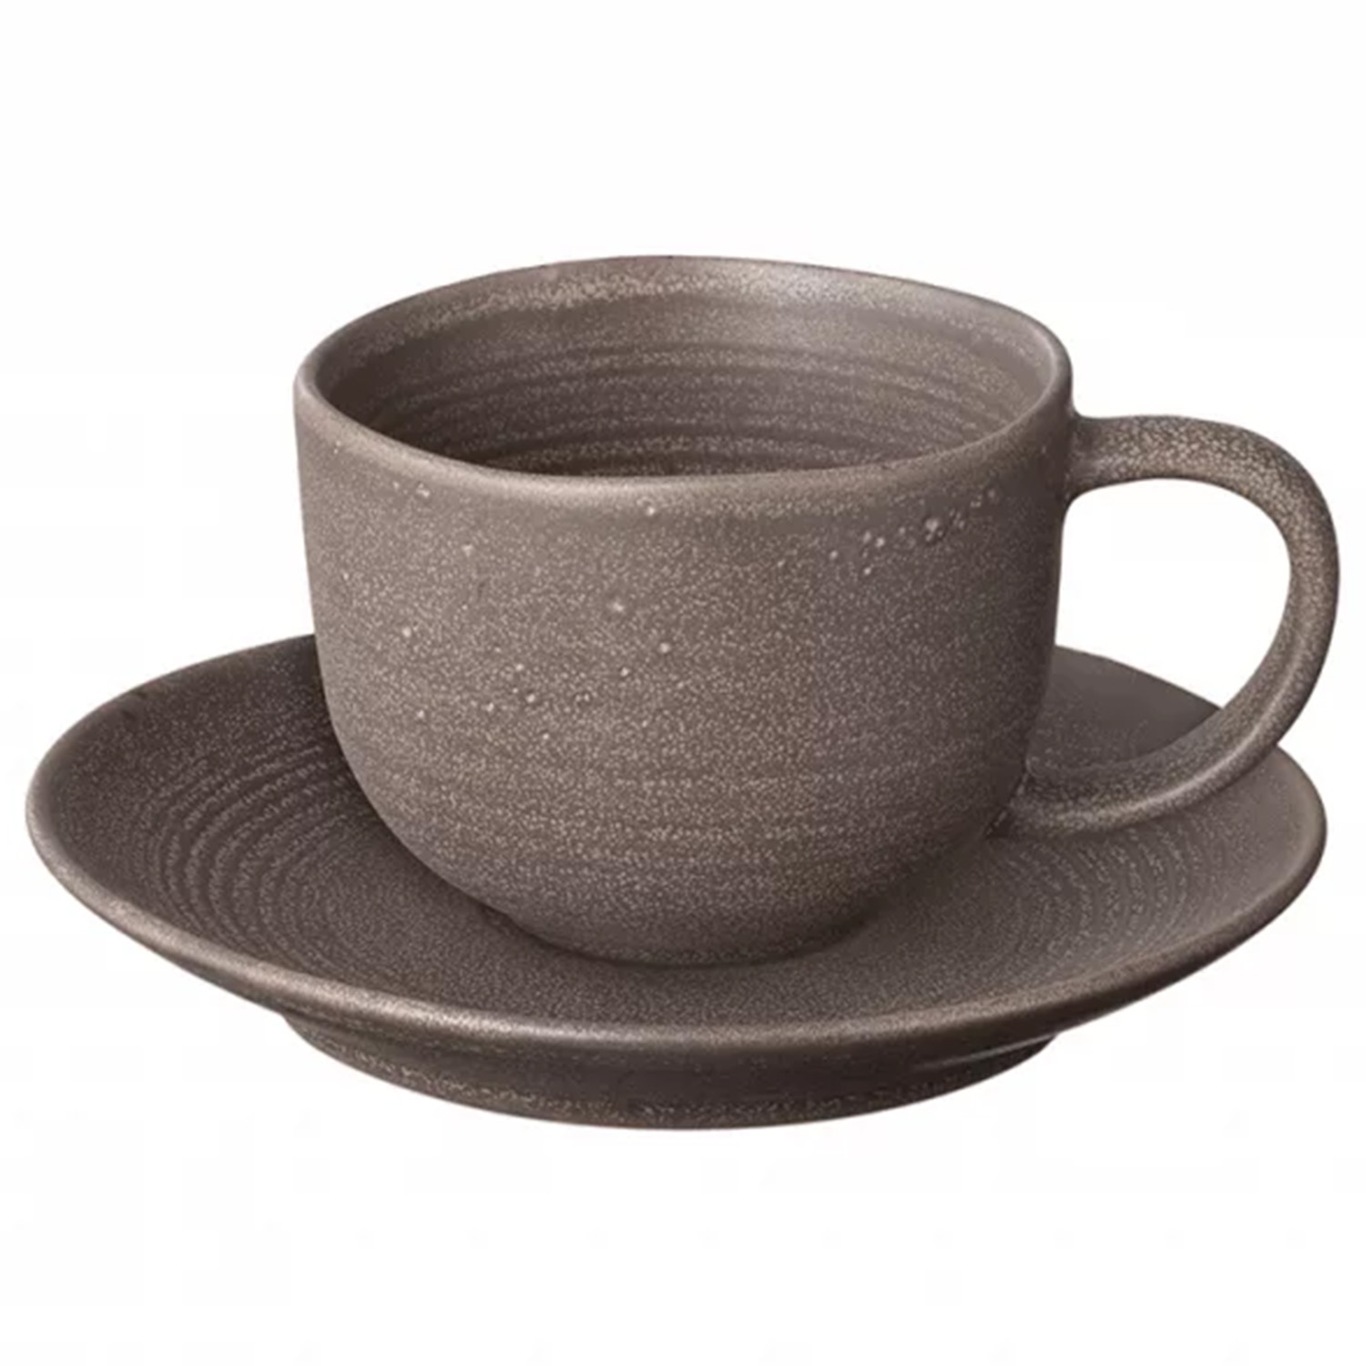 Kumi Stoneware Coffee Cups with Saucers - Set of 2